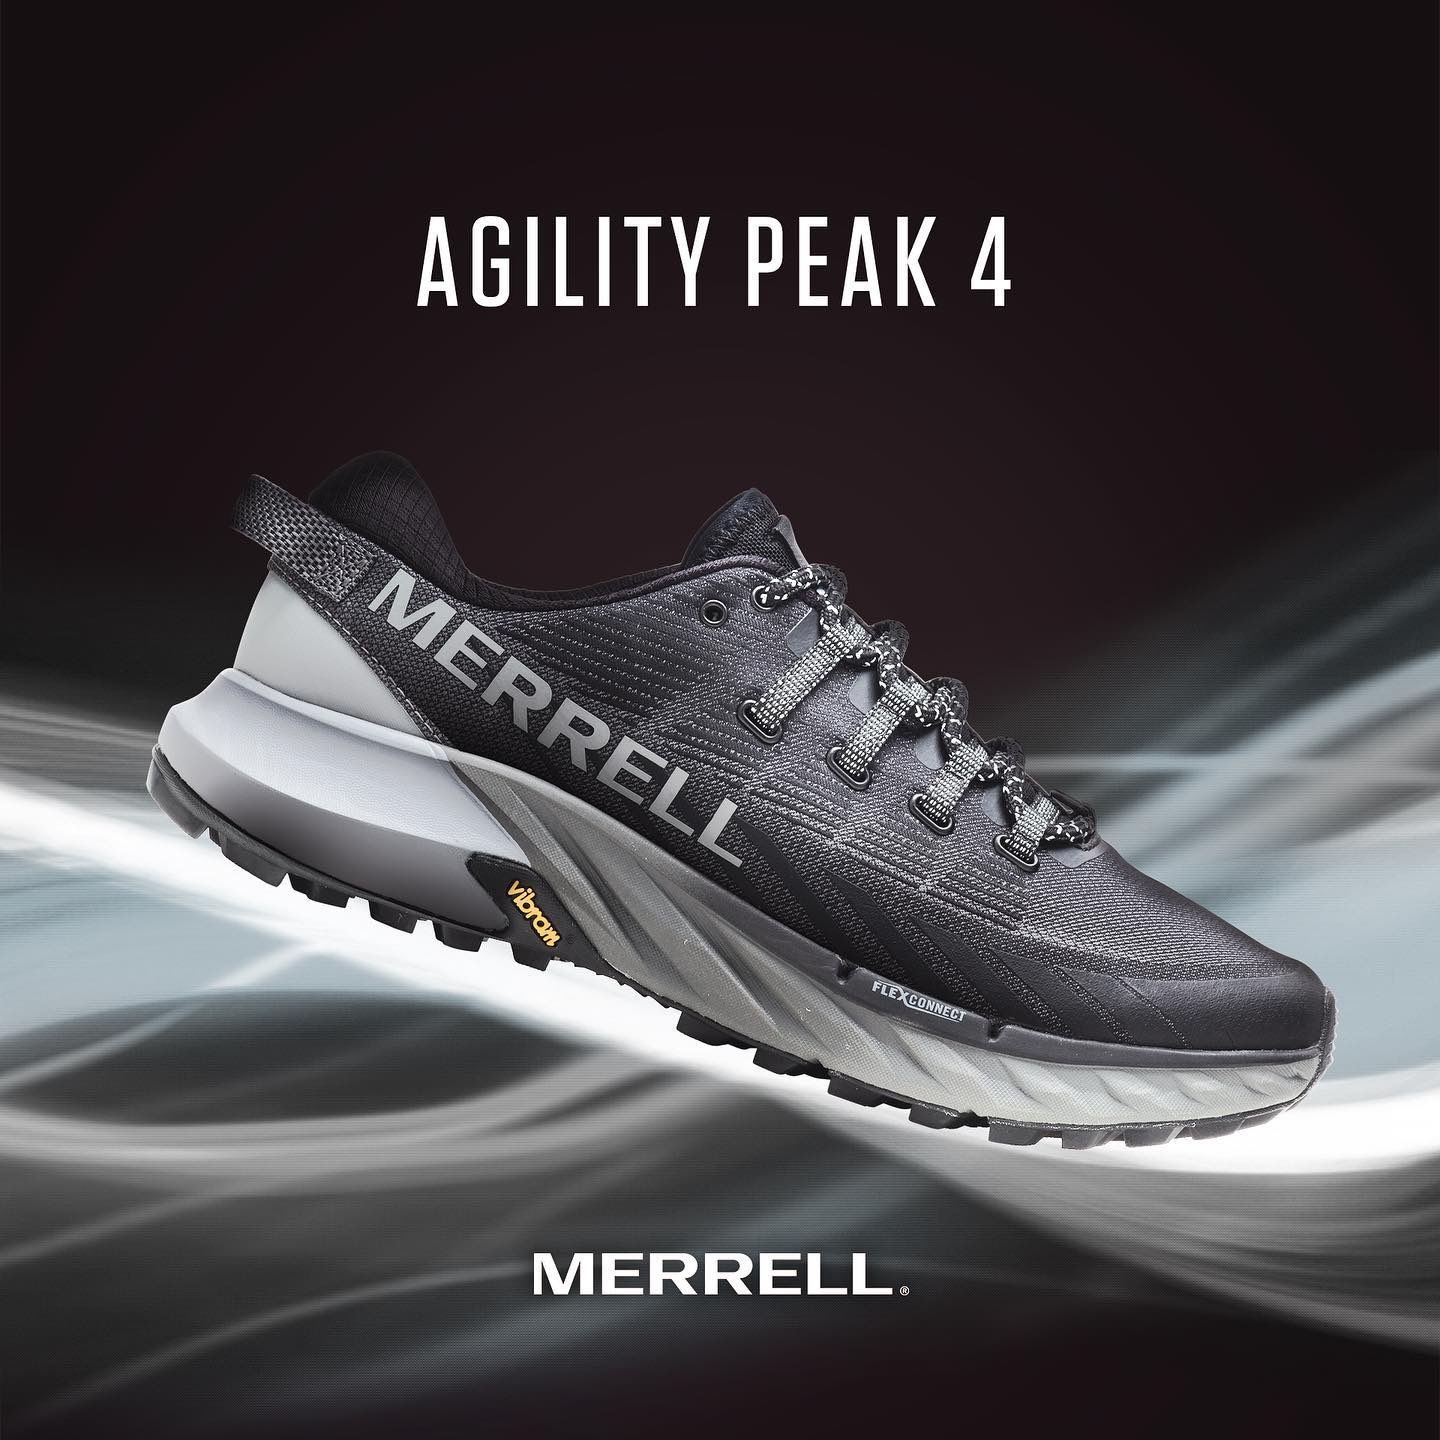 Fruity uberørt fattigdom Merrell Philippines on X: "Introducing the Agility Peak 4. This shoe is our  grippiest trail running shoe yet, designed for those who want a lot of  protection on even the most rugged